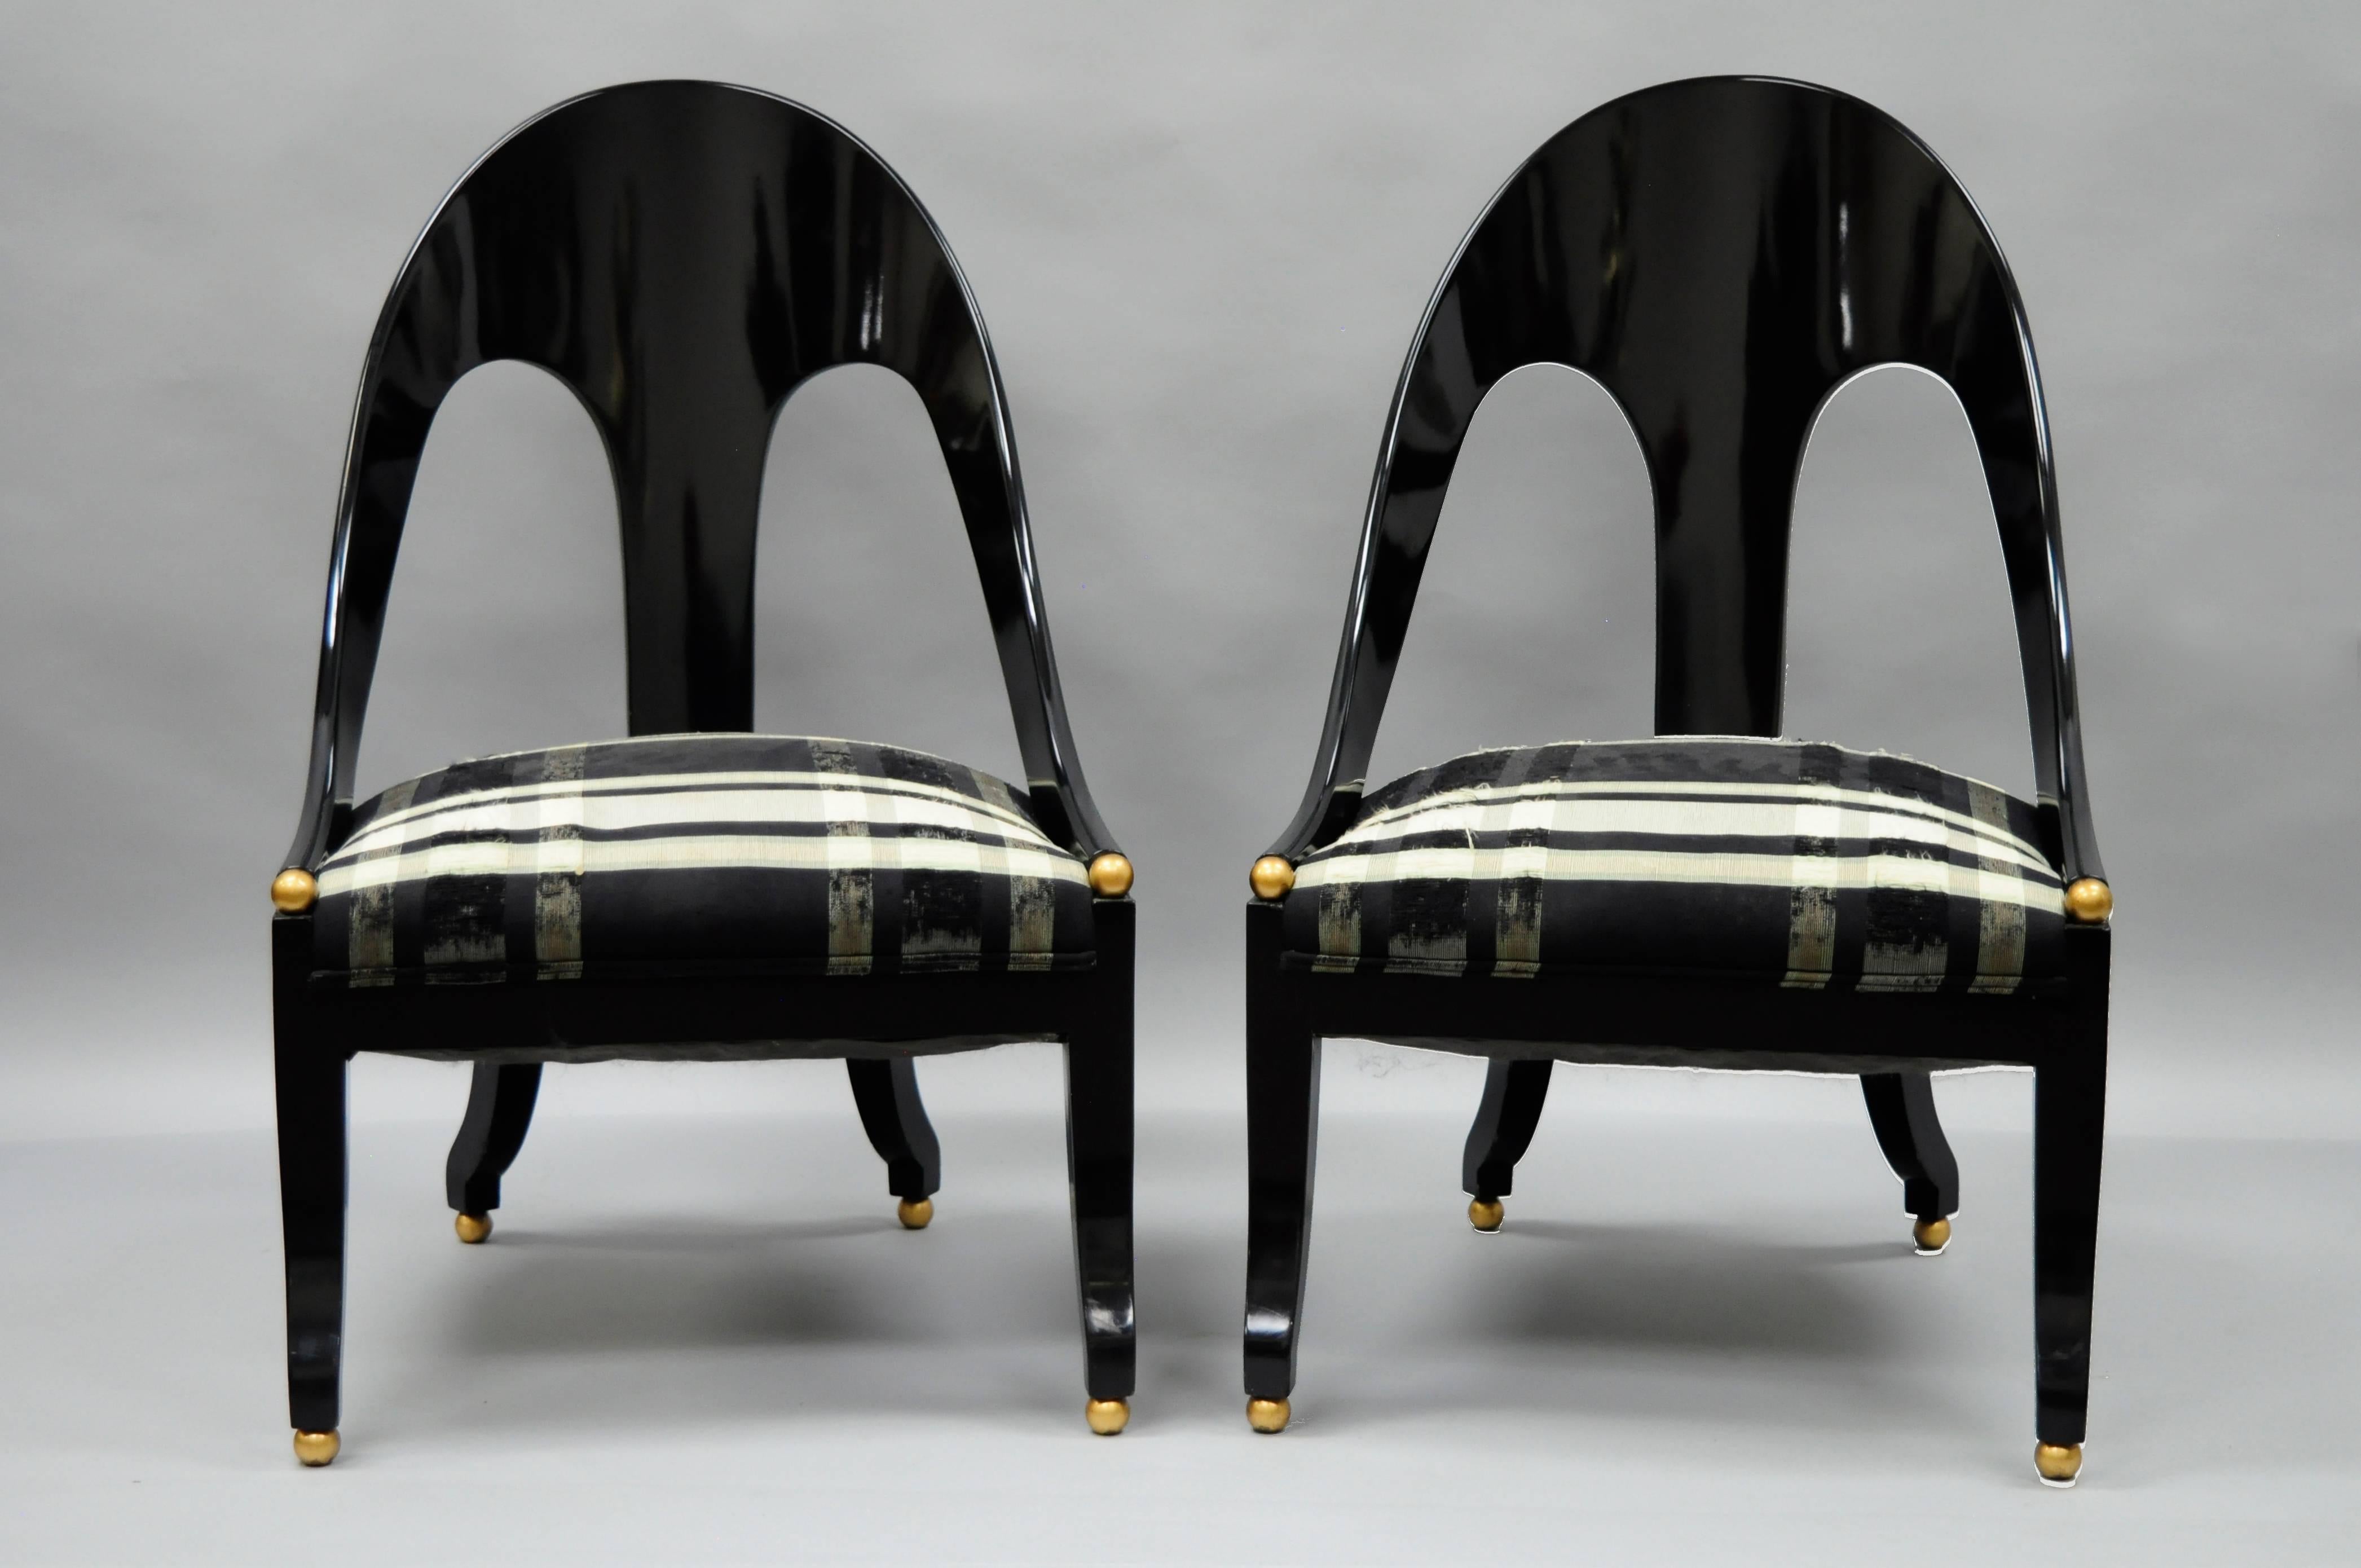 Pair of black lacquered spoon back slipper chairs designed by Michael Taylor for Baker in the neoclassical style. The chairs feature a sleek elegant design with a gloss black lacquered finish, and gold toned orbs at the ends of the armrests and